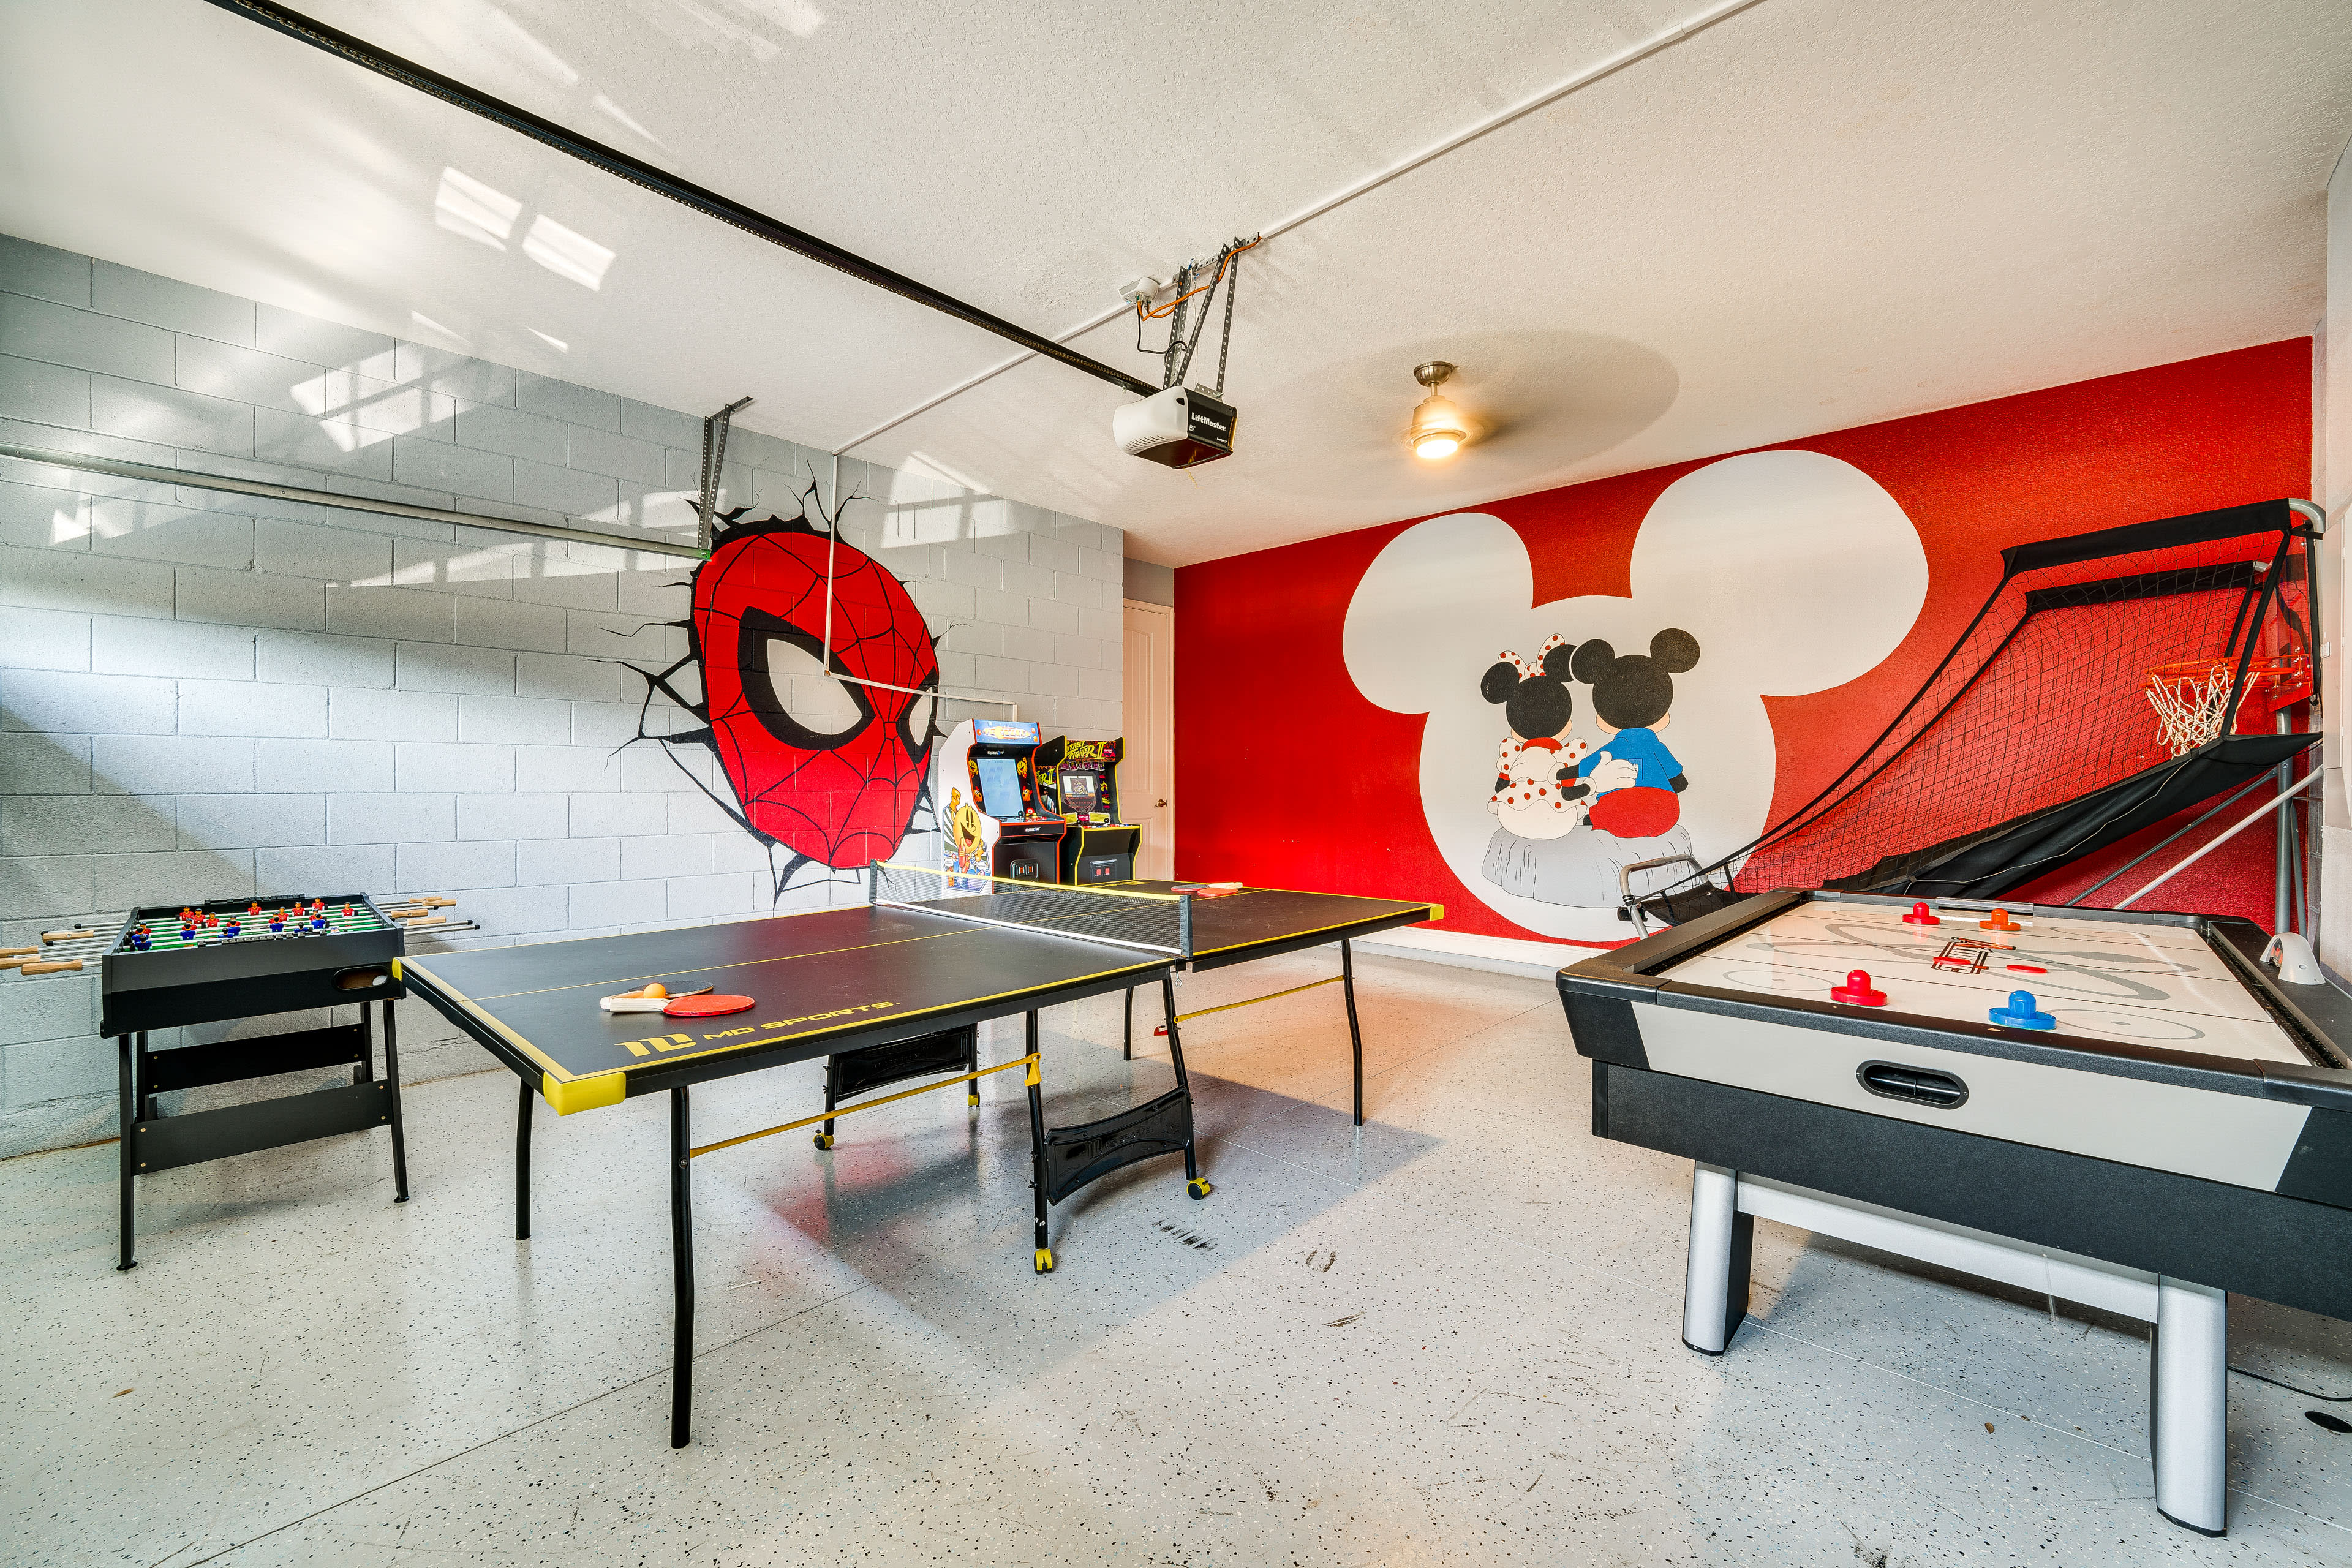 Game Room | Ping Pong Table | Foosball Table | Air Hockey Table